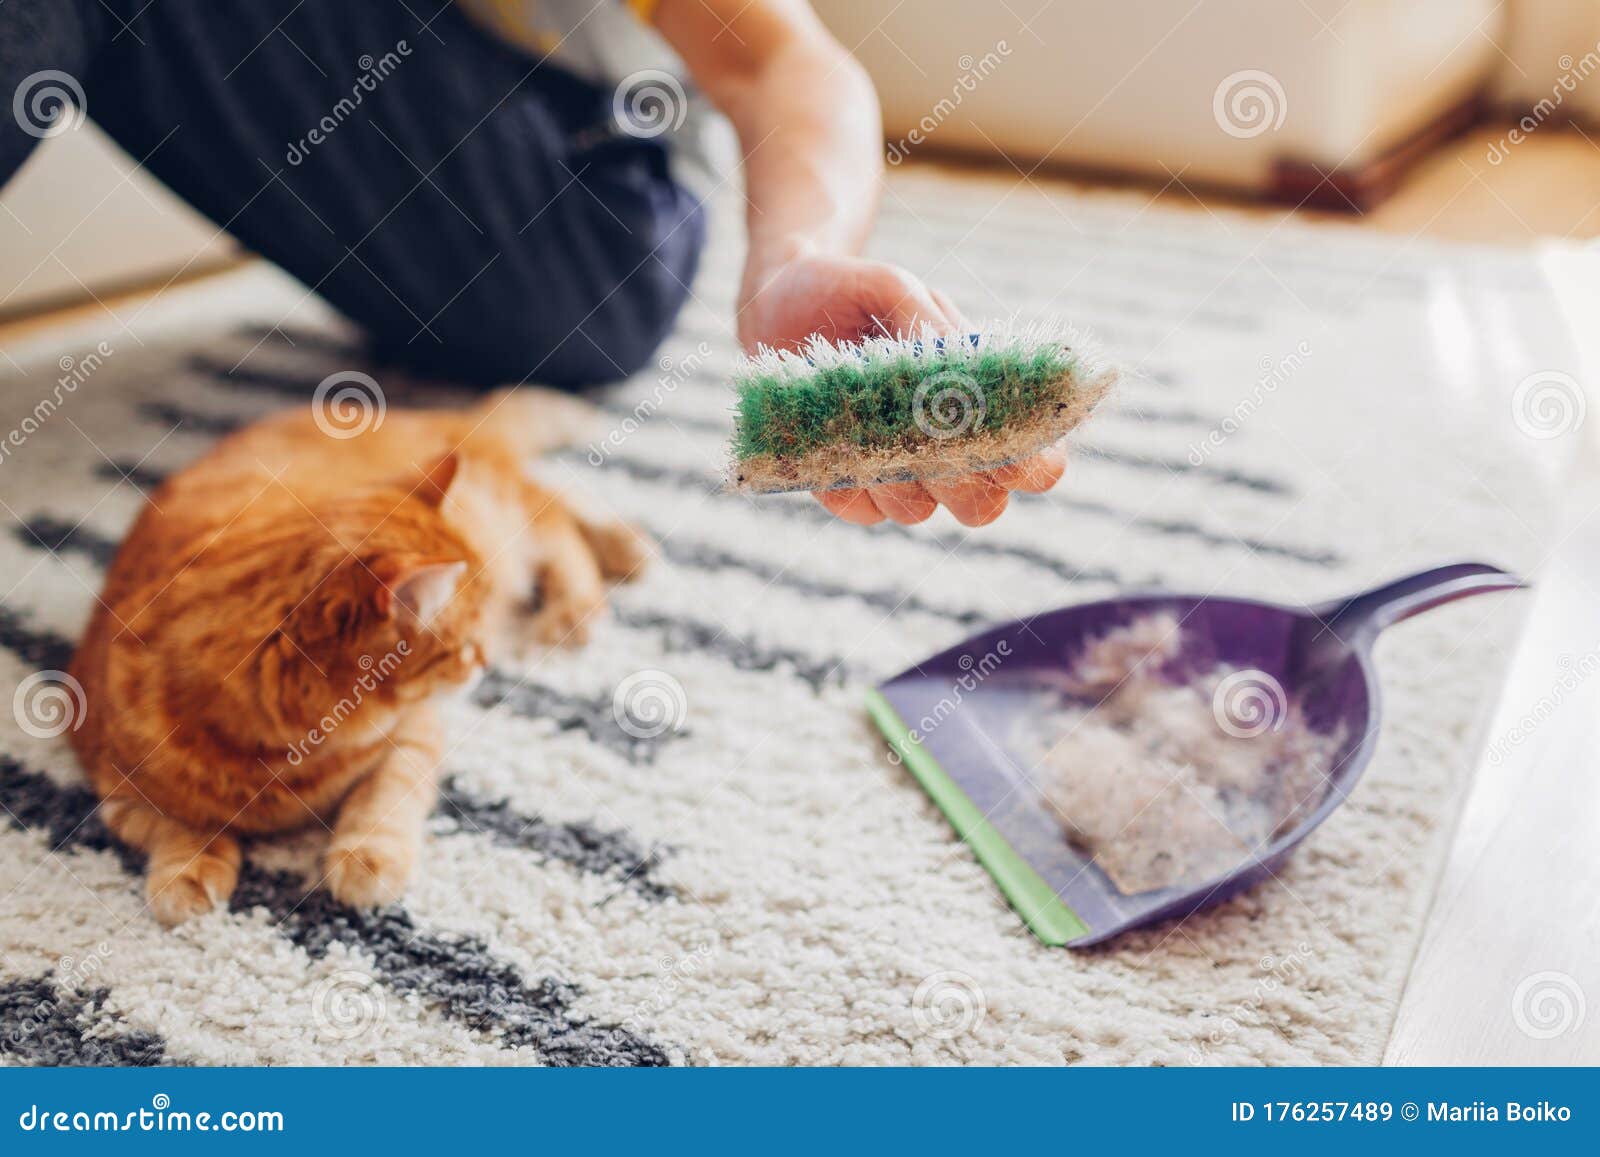 Cleaning Carpet From Cat Hair With Brush At Home. Man Cleans Dirty Rug Puts Animal Fur In Scoop